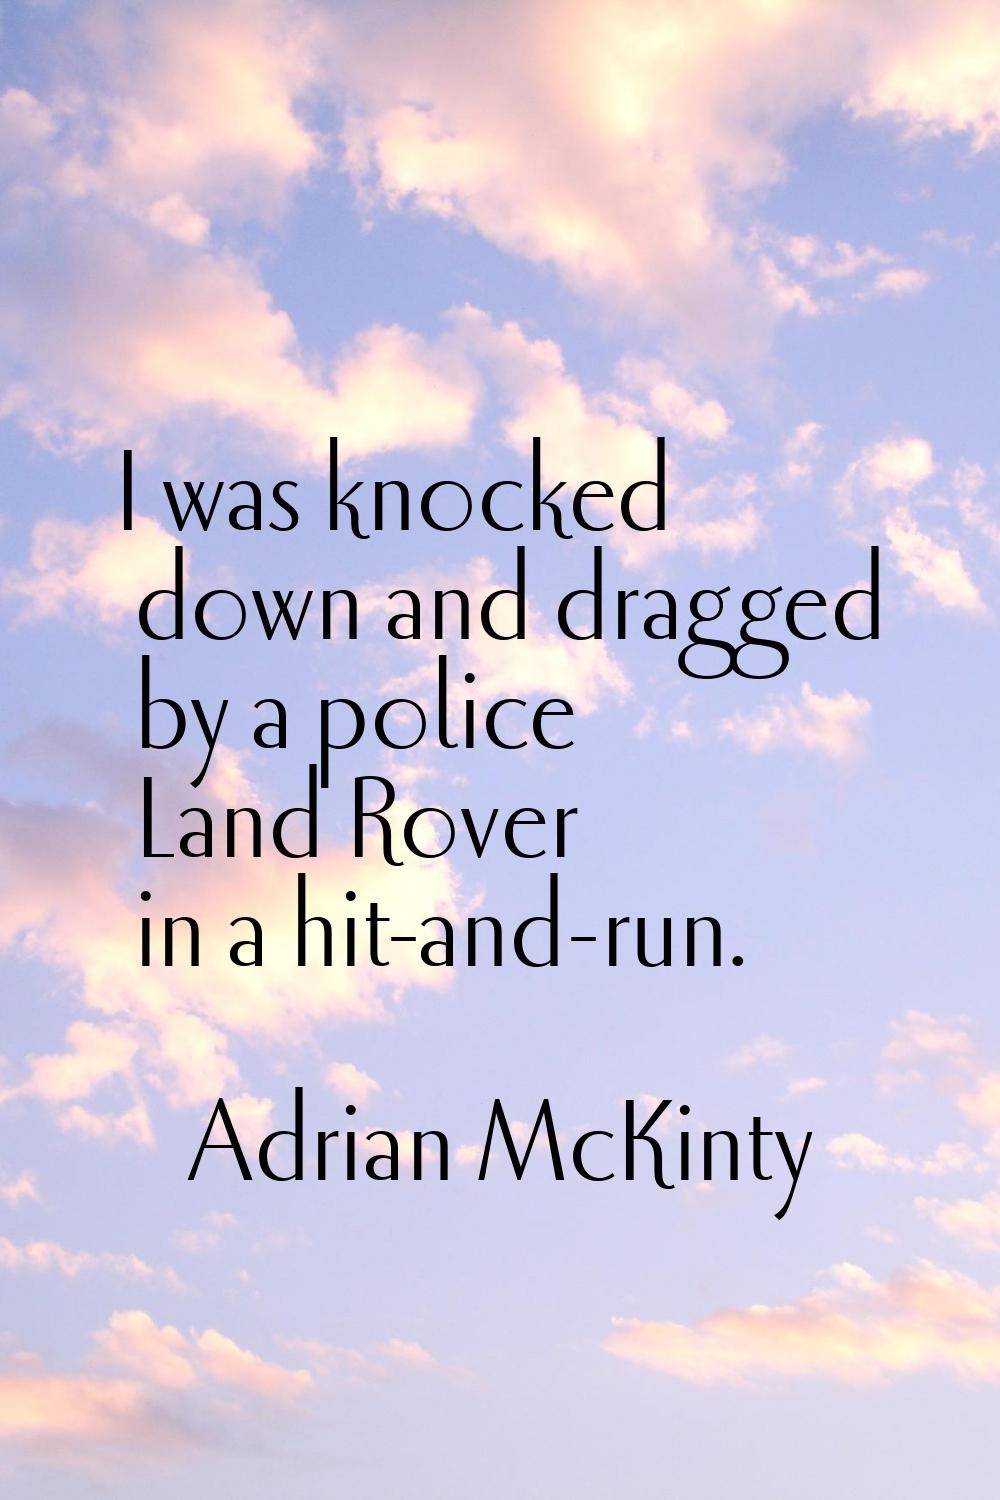 I was knocked down and dragged by a police Land Rover in a hit-and-run.